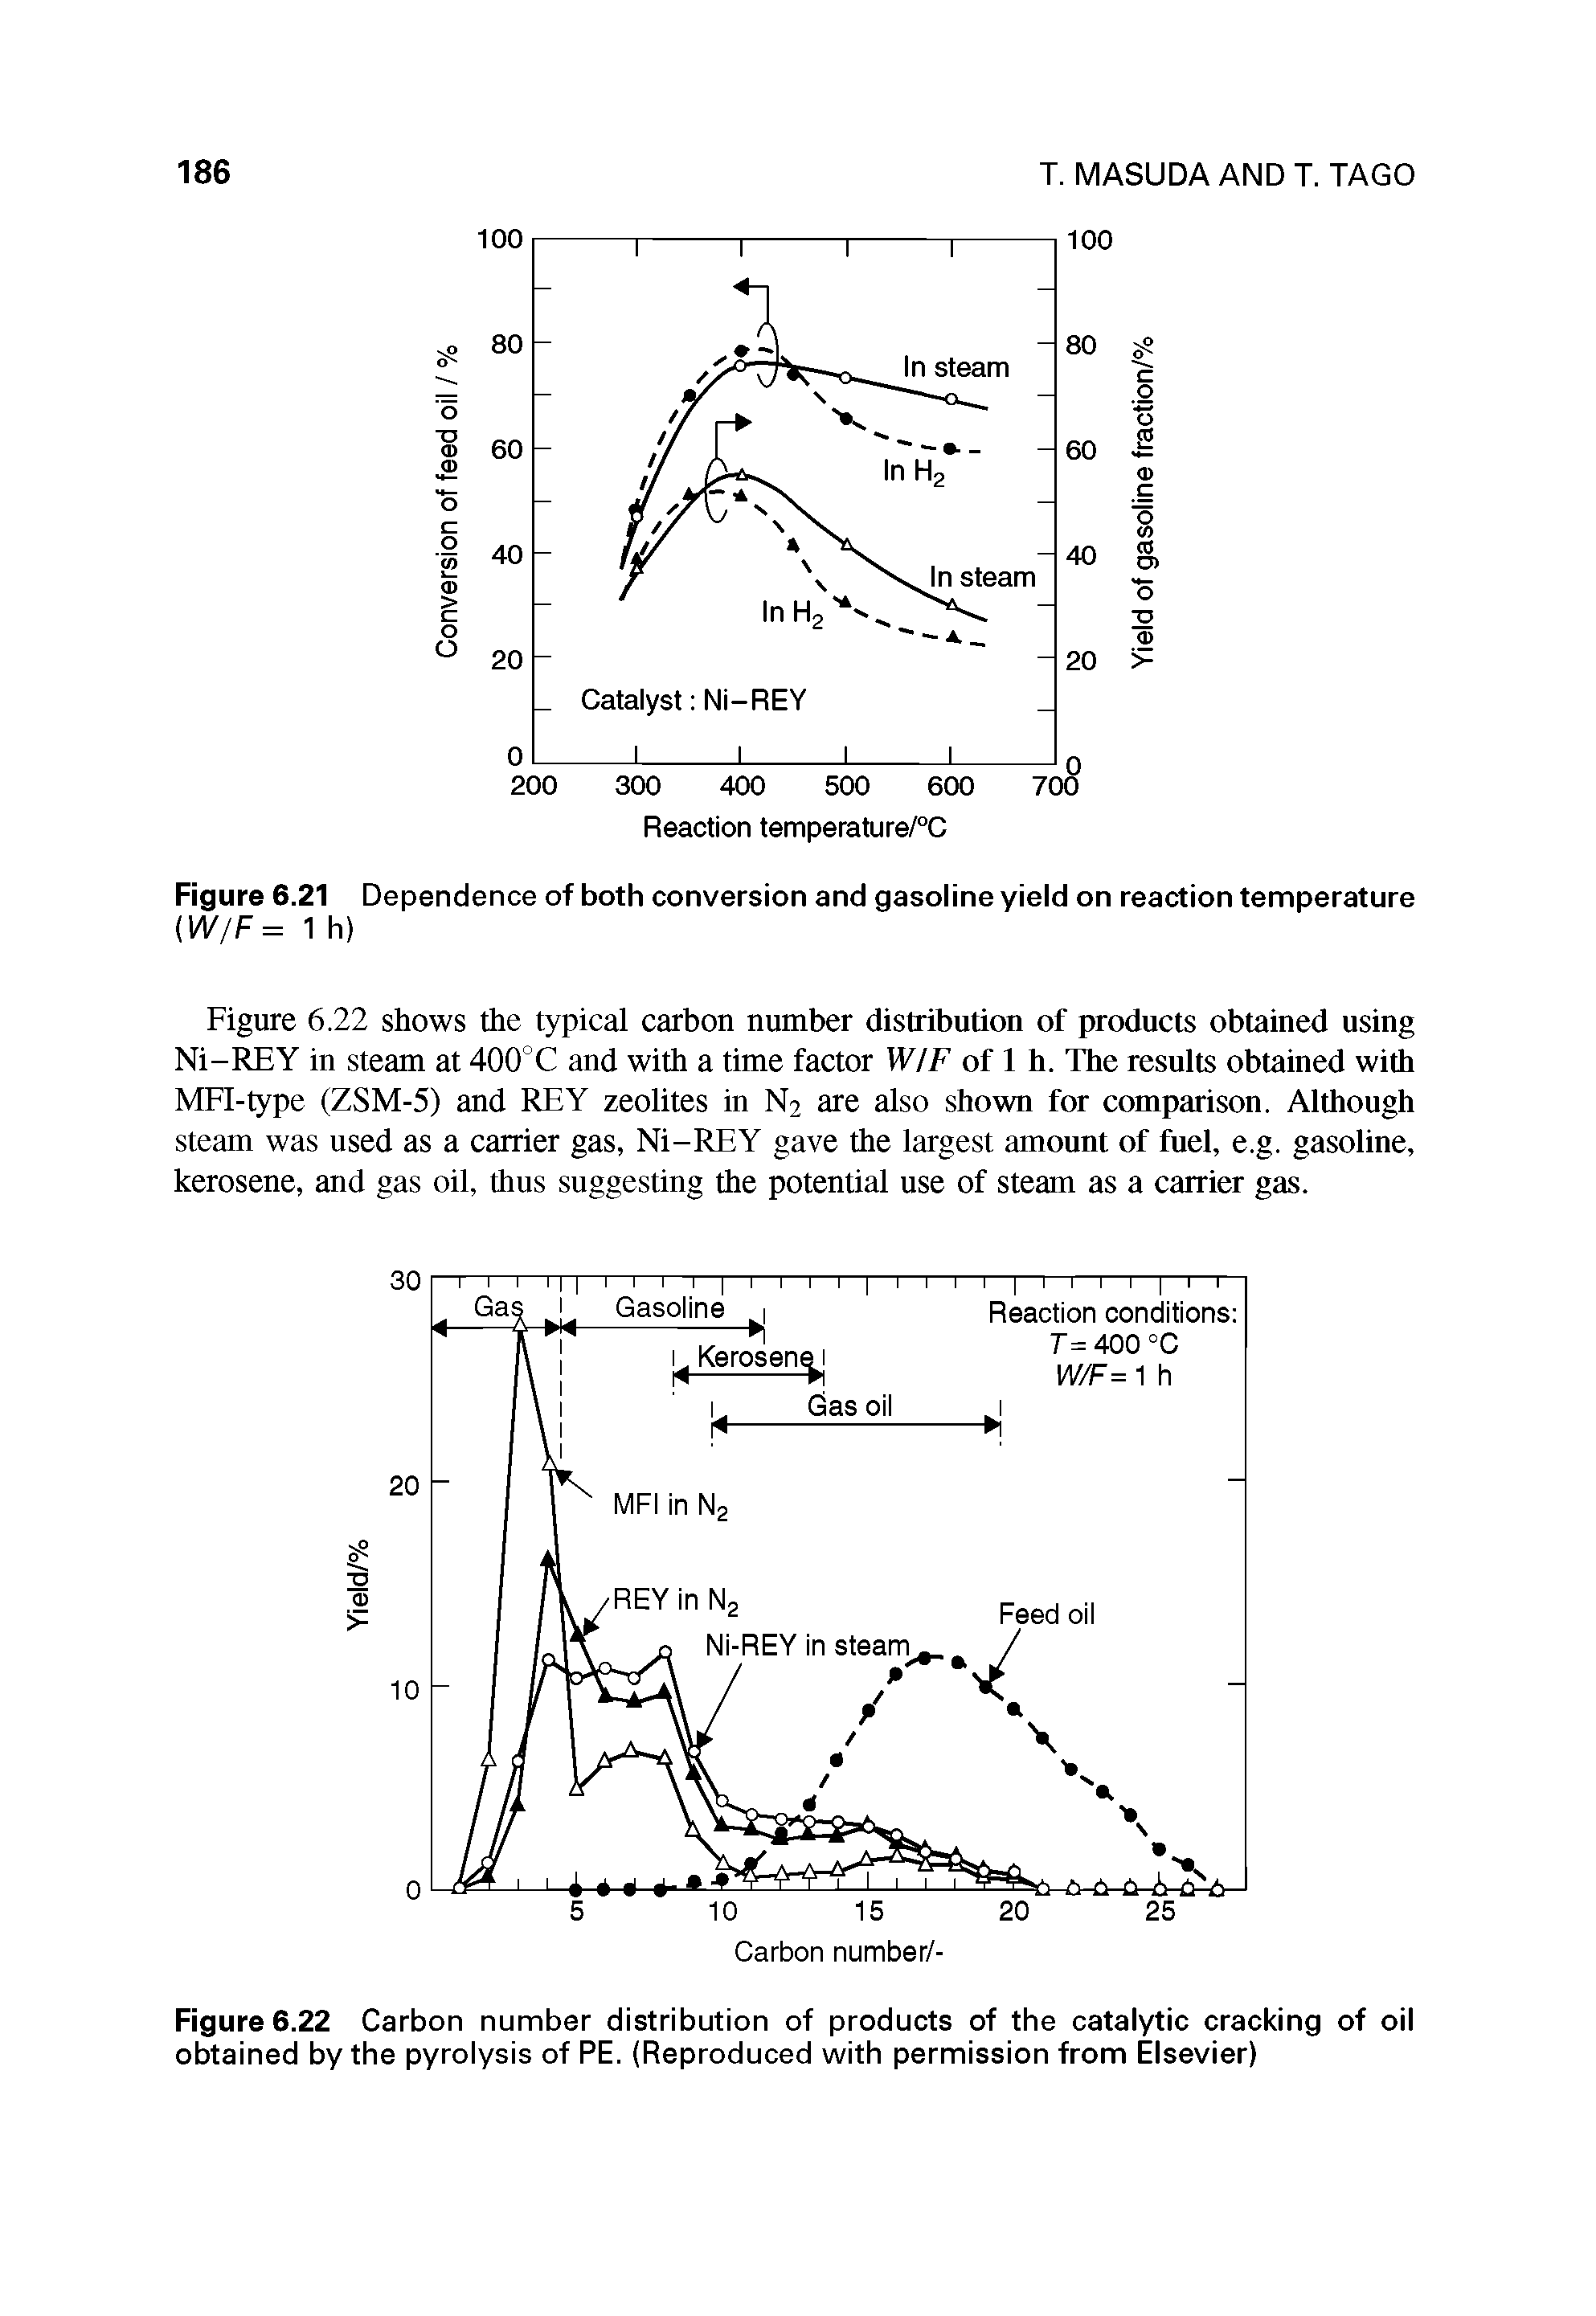 Figure 6.22 Carbon number distribution of products of the catalytic cracking of oil obtained by the pyrolysis of PE. (Reproduced with permission from Elsevier)...